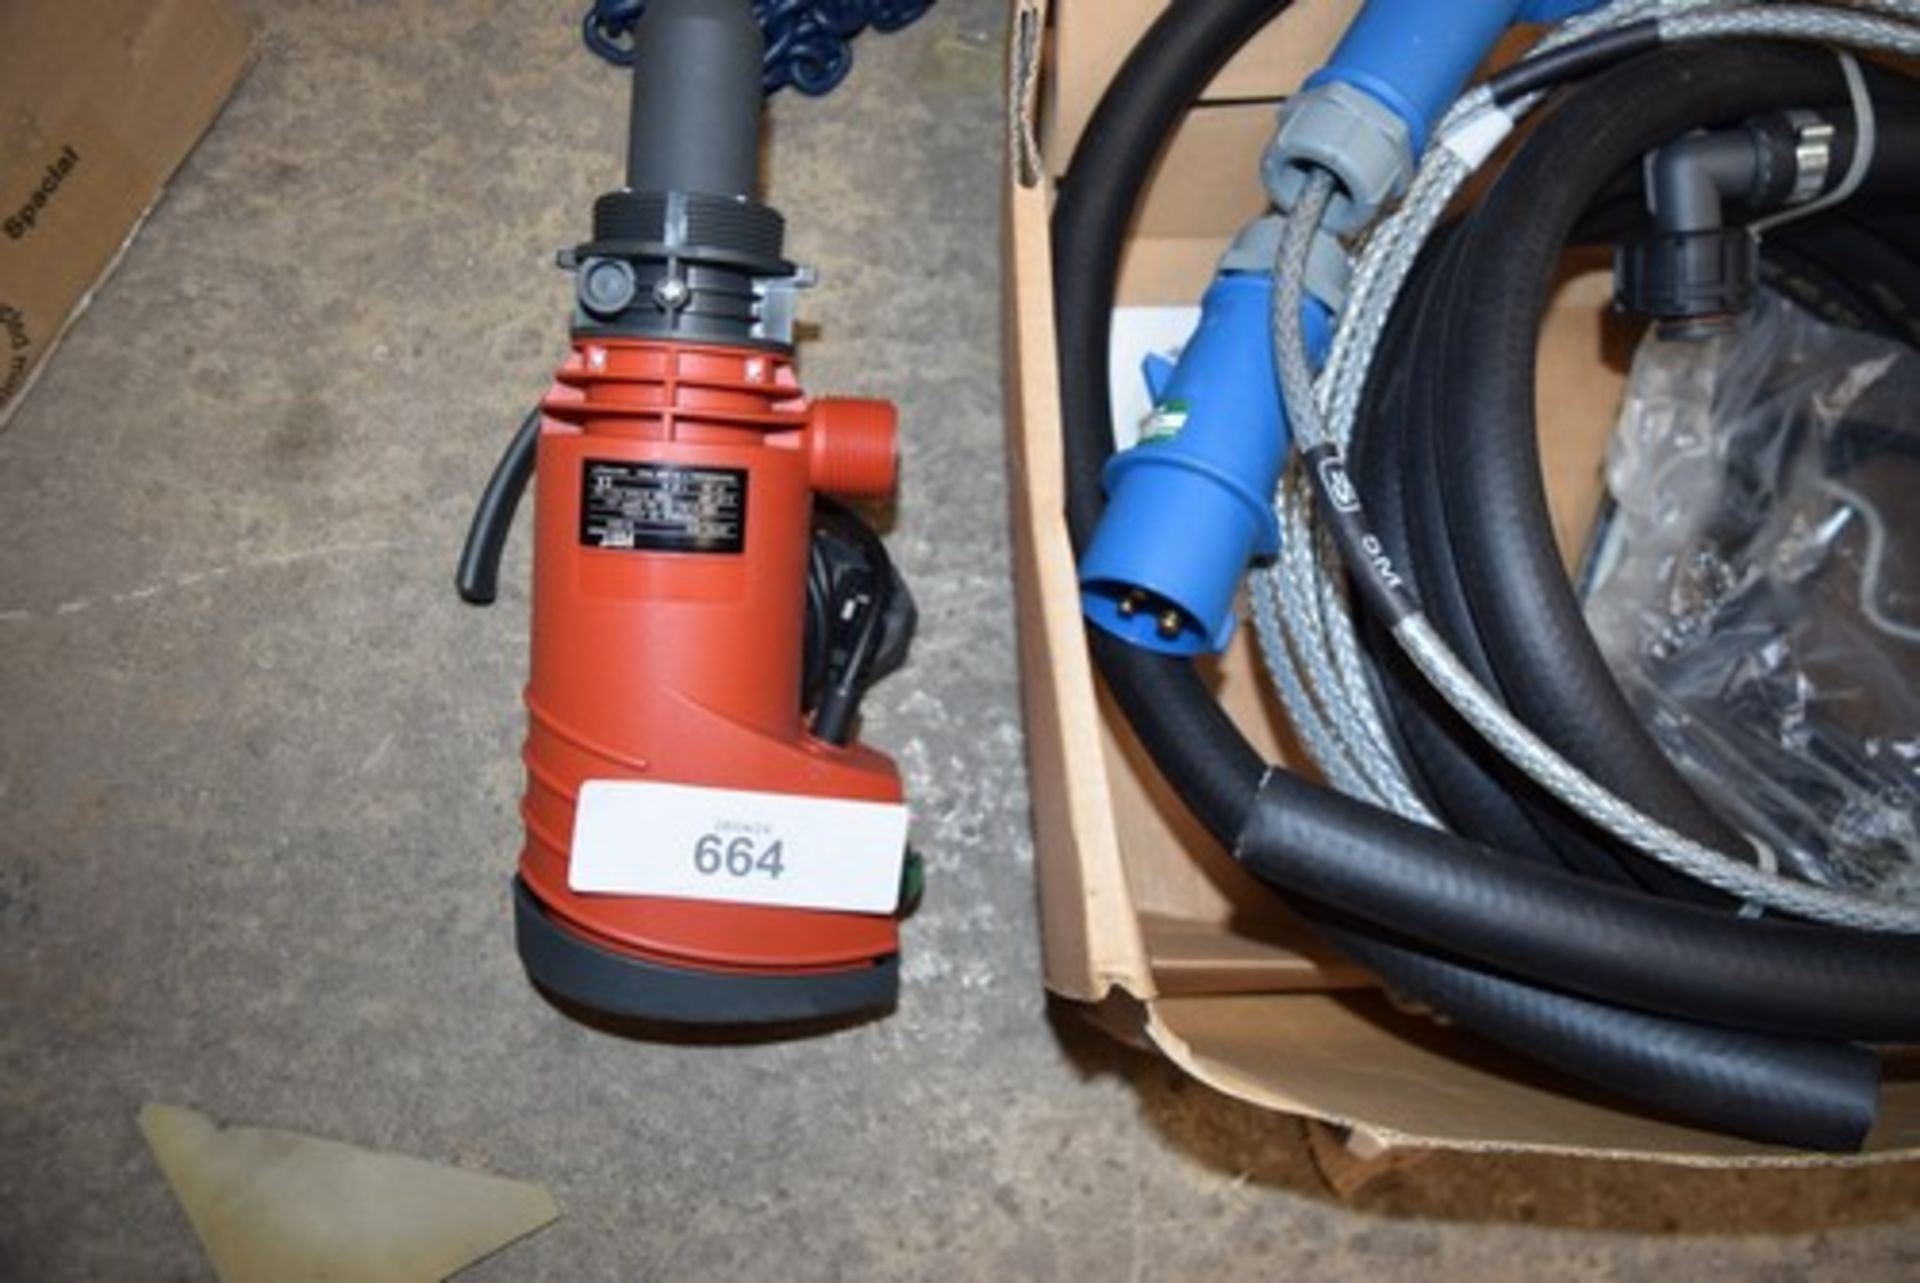 1 x Fluid Management Tech electric pump 23731 932, 240v, 52L P.H, pipe work and nozzle - new (GS1) - Image 2 of 3